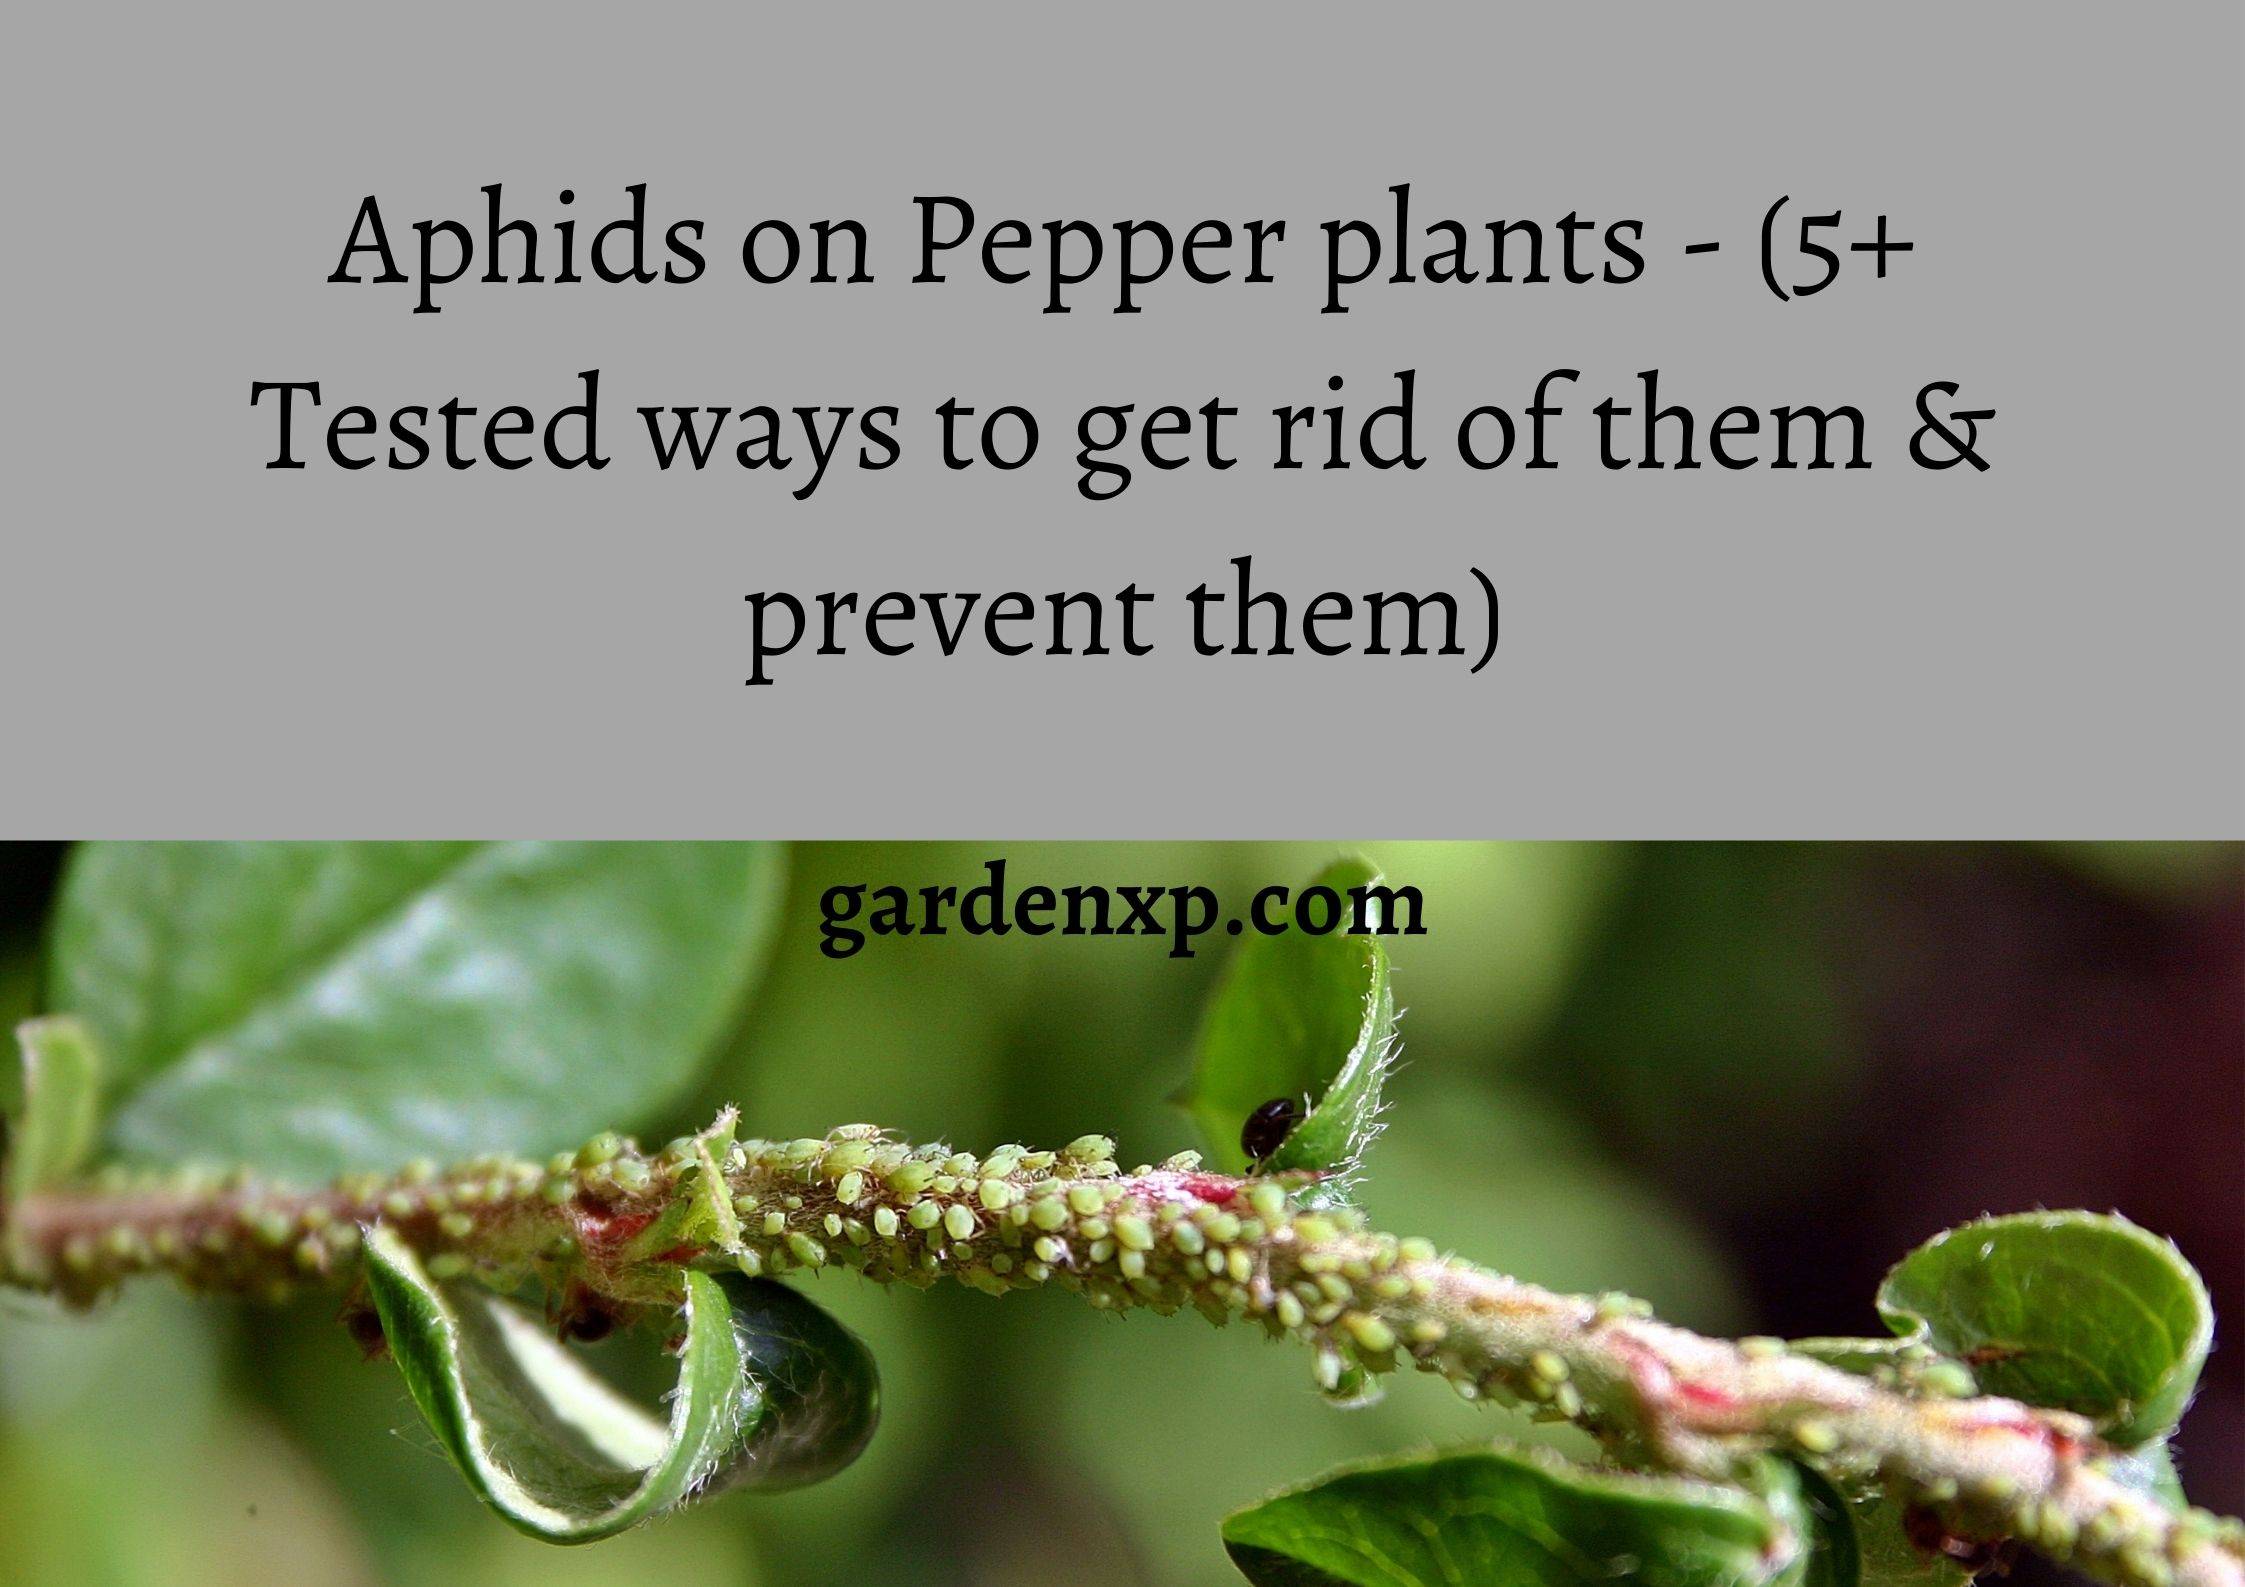 Aphids on Pepper plants - (5+ Tested ways to get rid of them & prevent them)